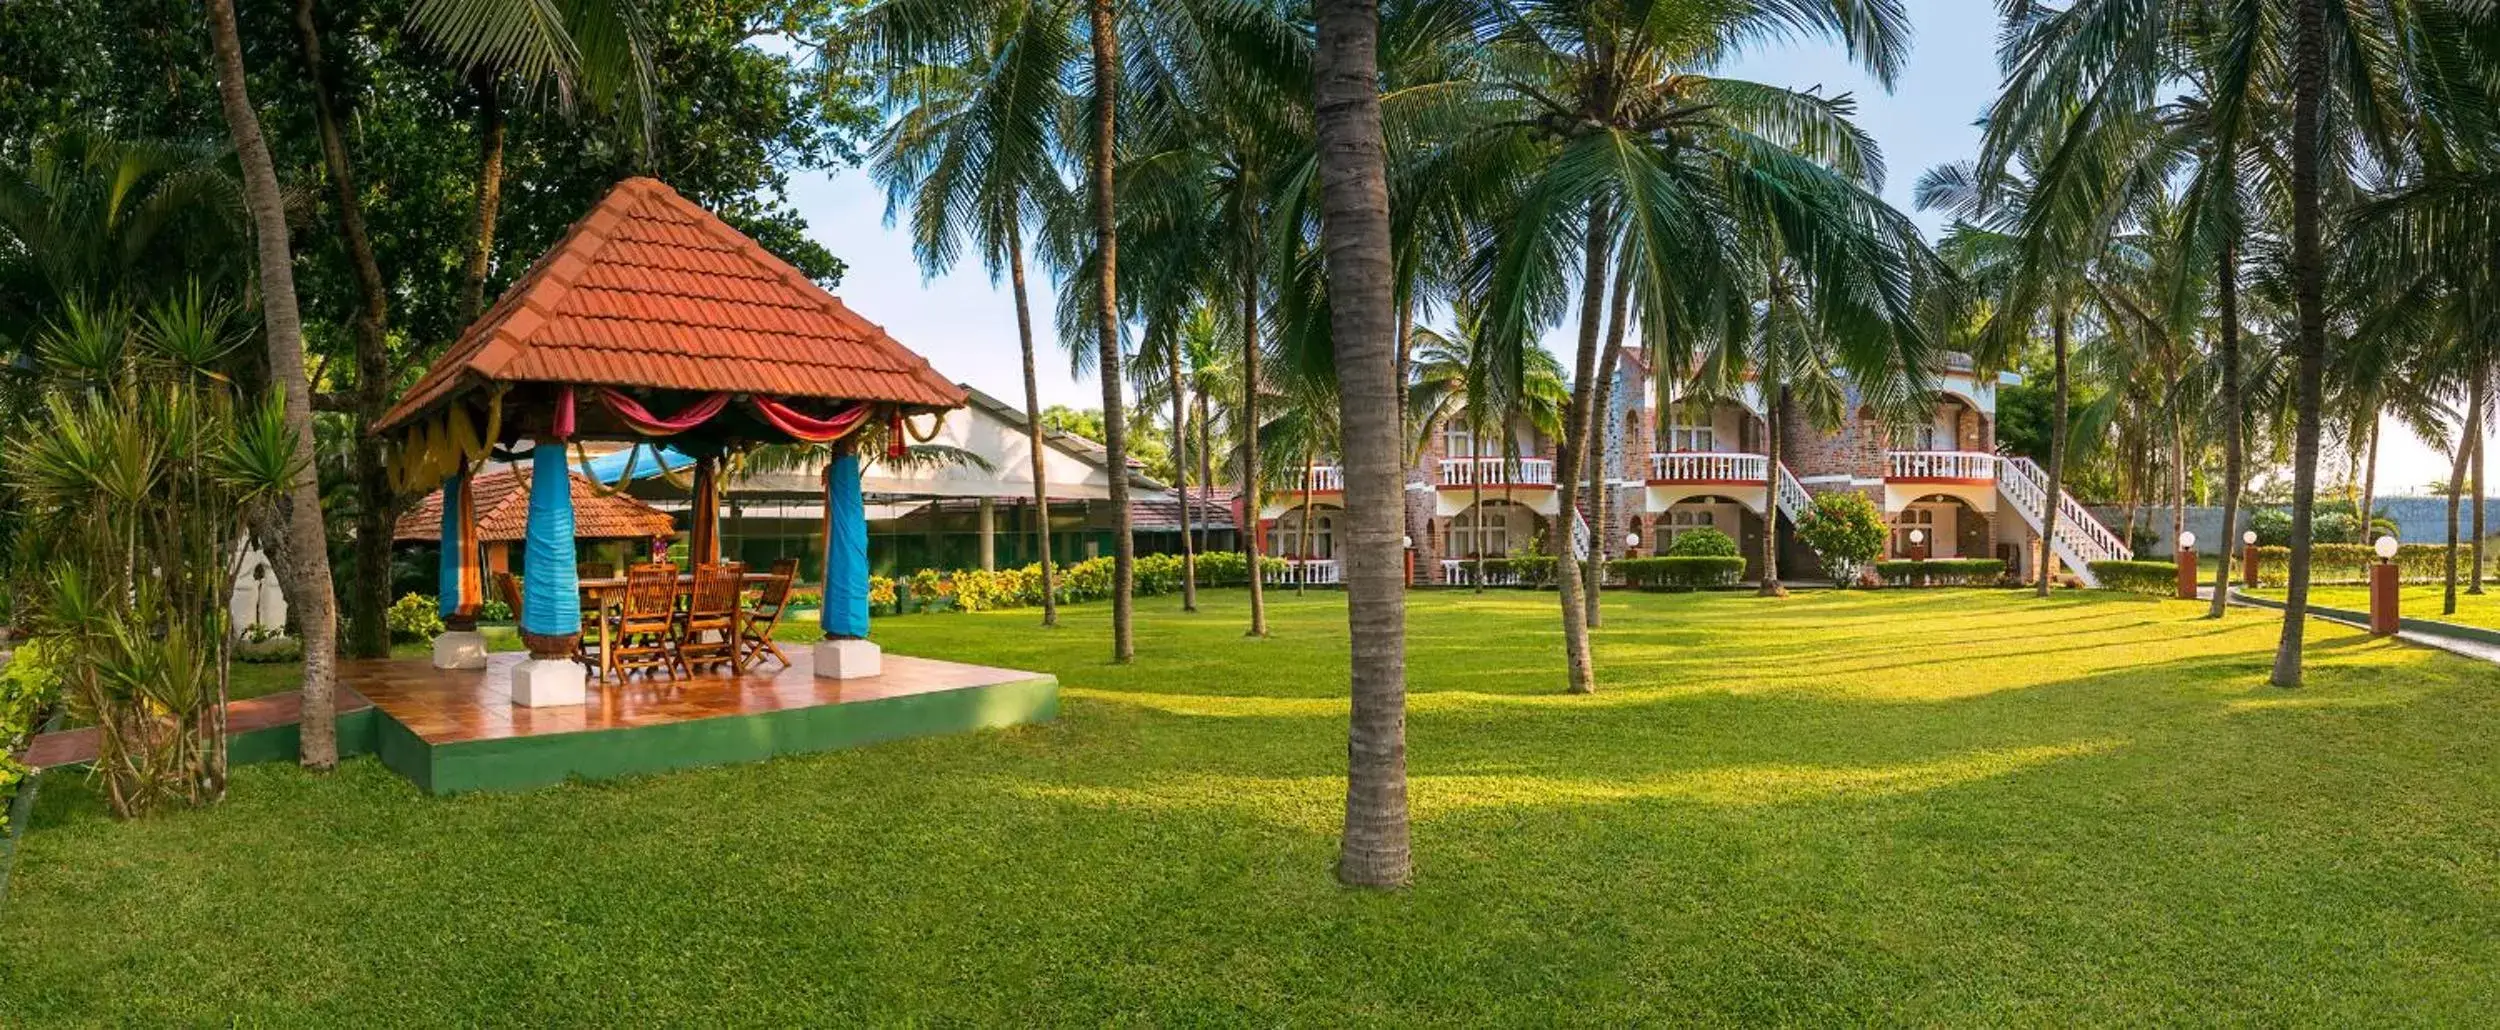 Property building in Ideal Beach Resort